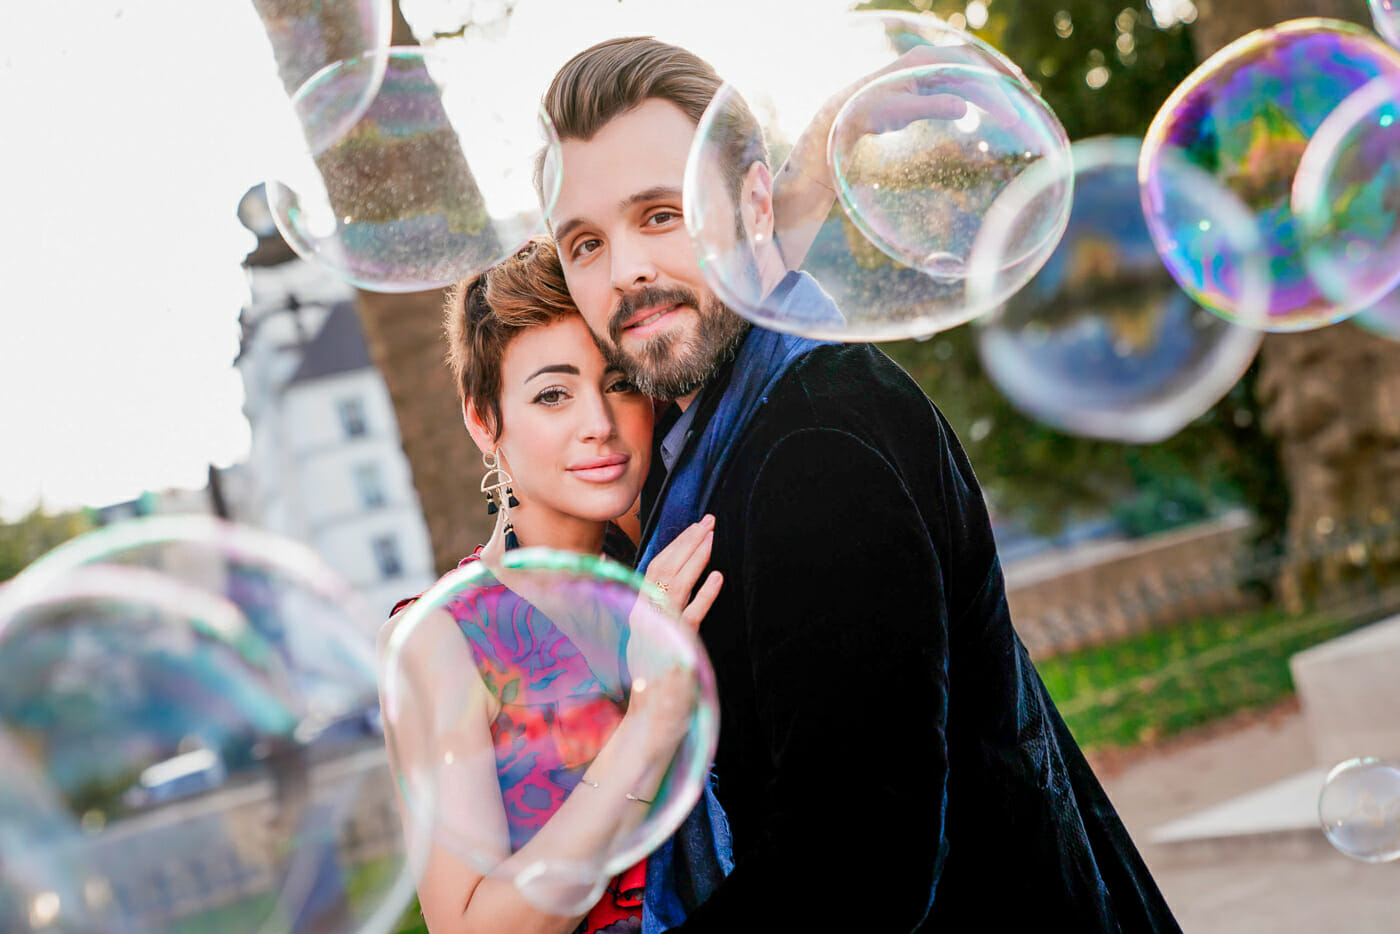 Creative Paris engagement photo with massive bubbles used as a prop